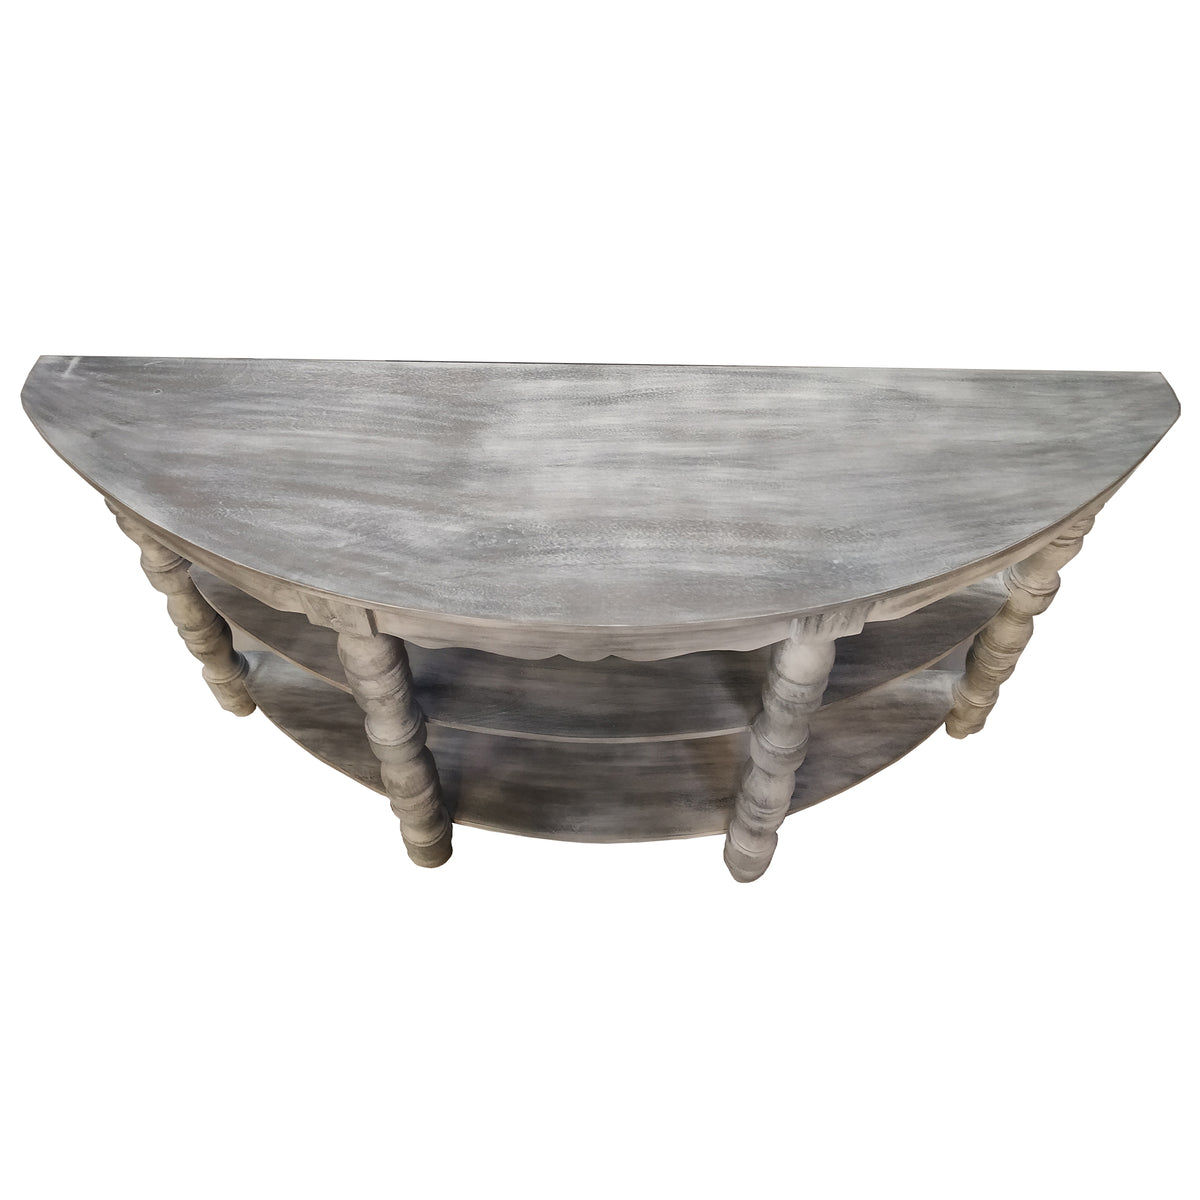 Half moon Shaped Wooden Console Table with 2 Shelves and Turned Legs, Gray - UPT-197310